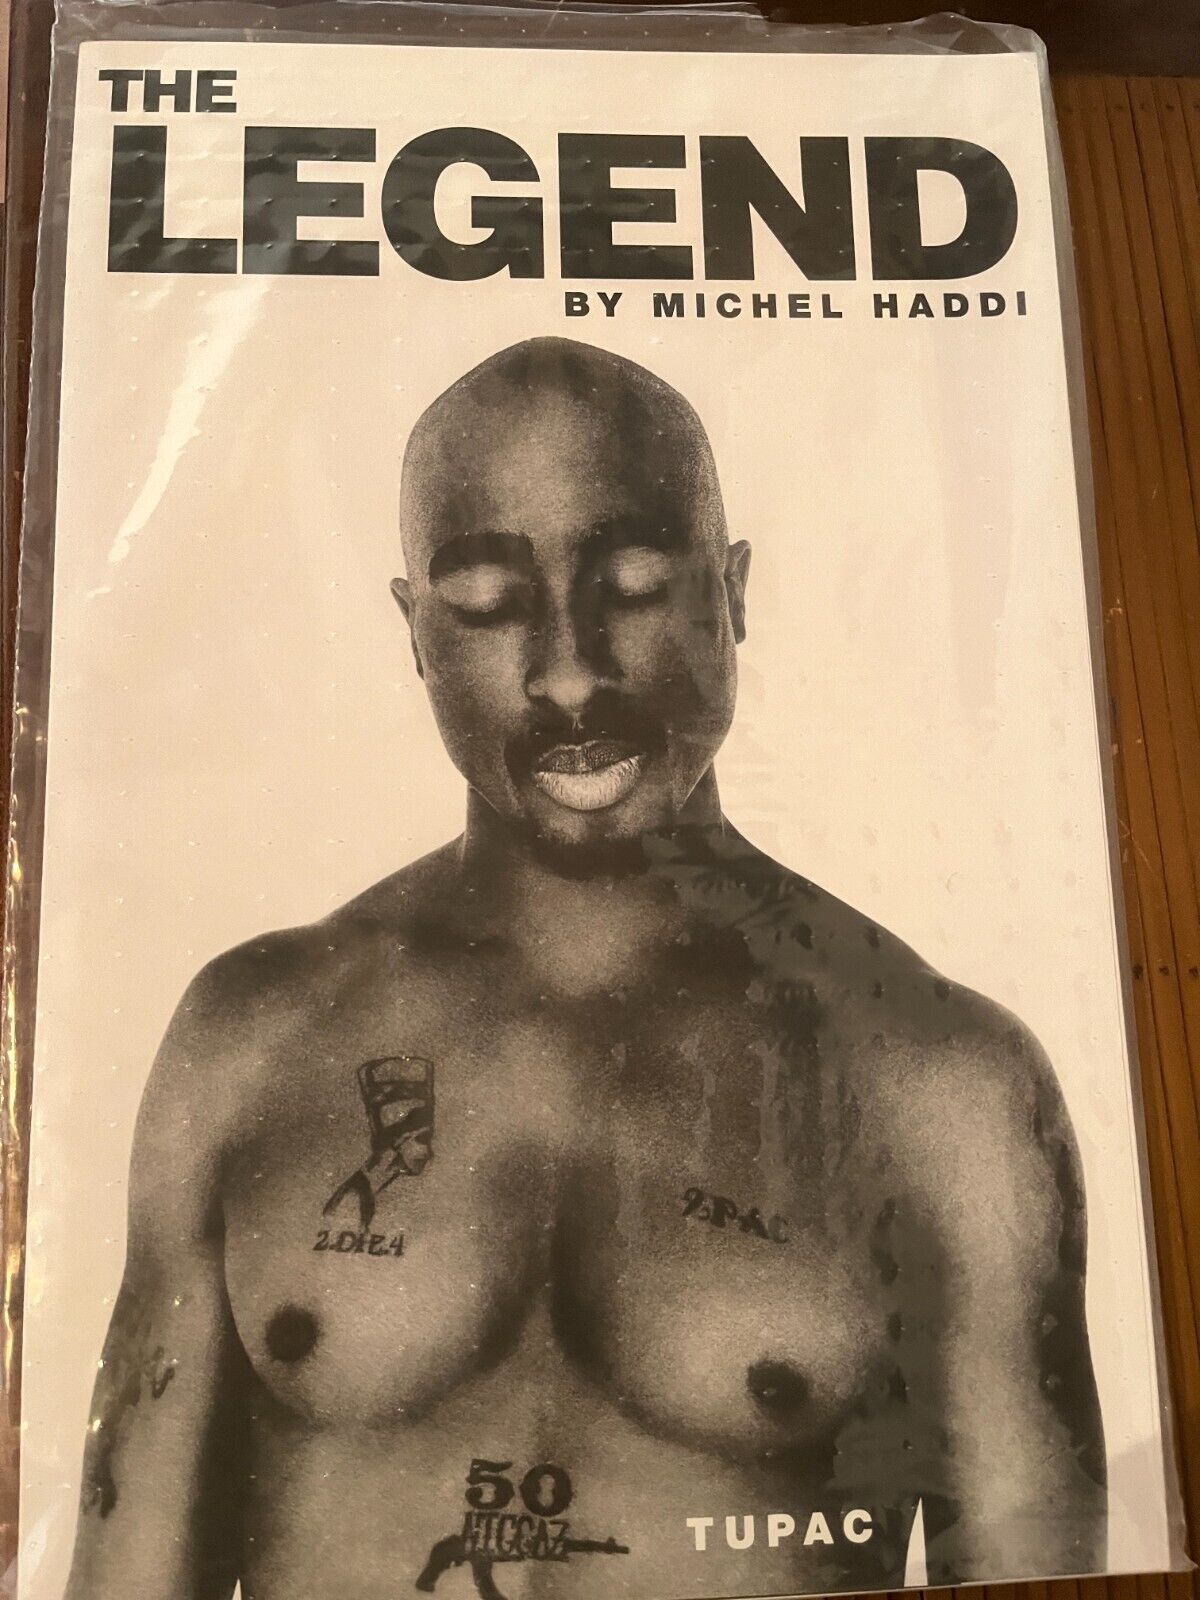 Michel Haddi - The Legend. Tupac / 500 copies hand-signed READY TO SHIP